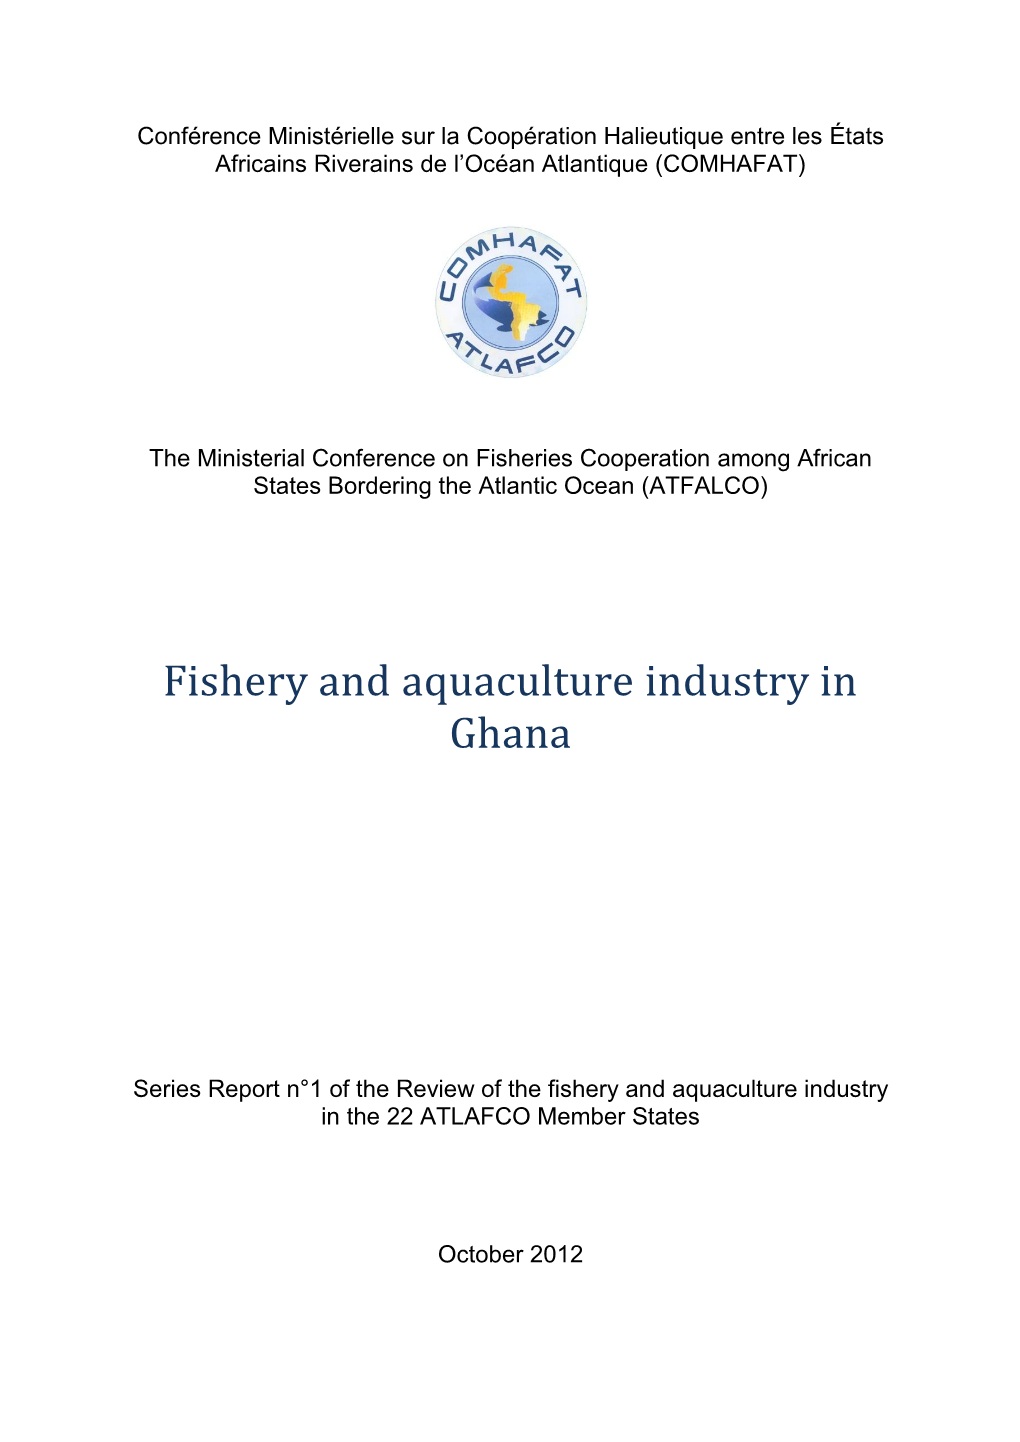 Fishery and Aquaculture Industry in Ghana